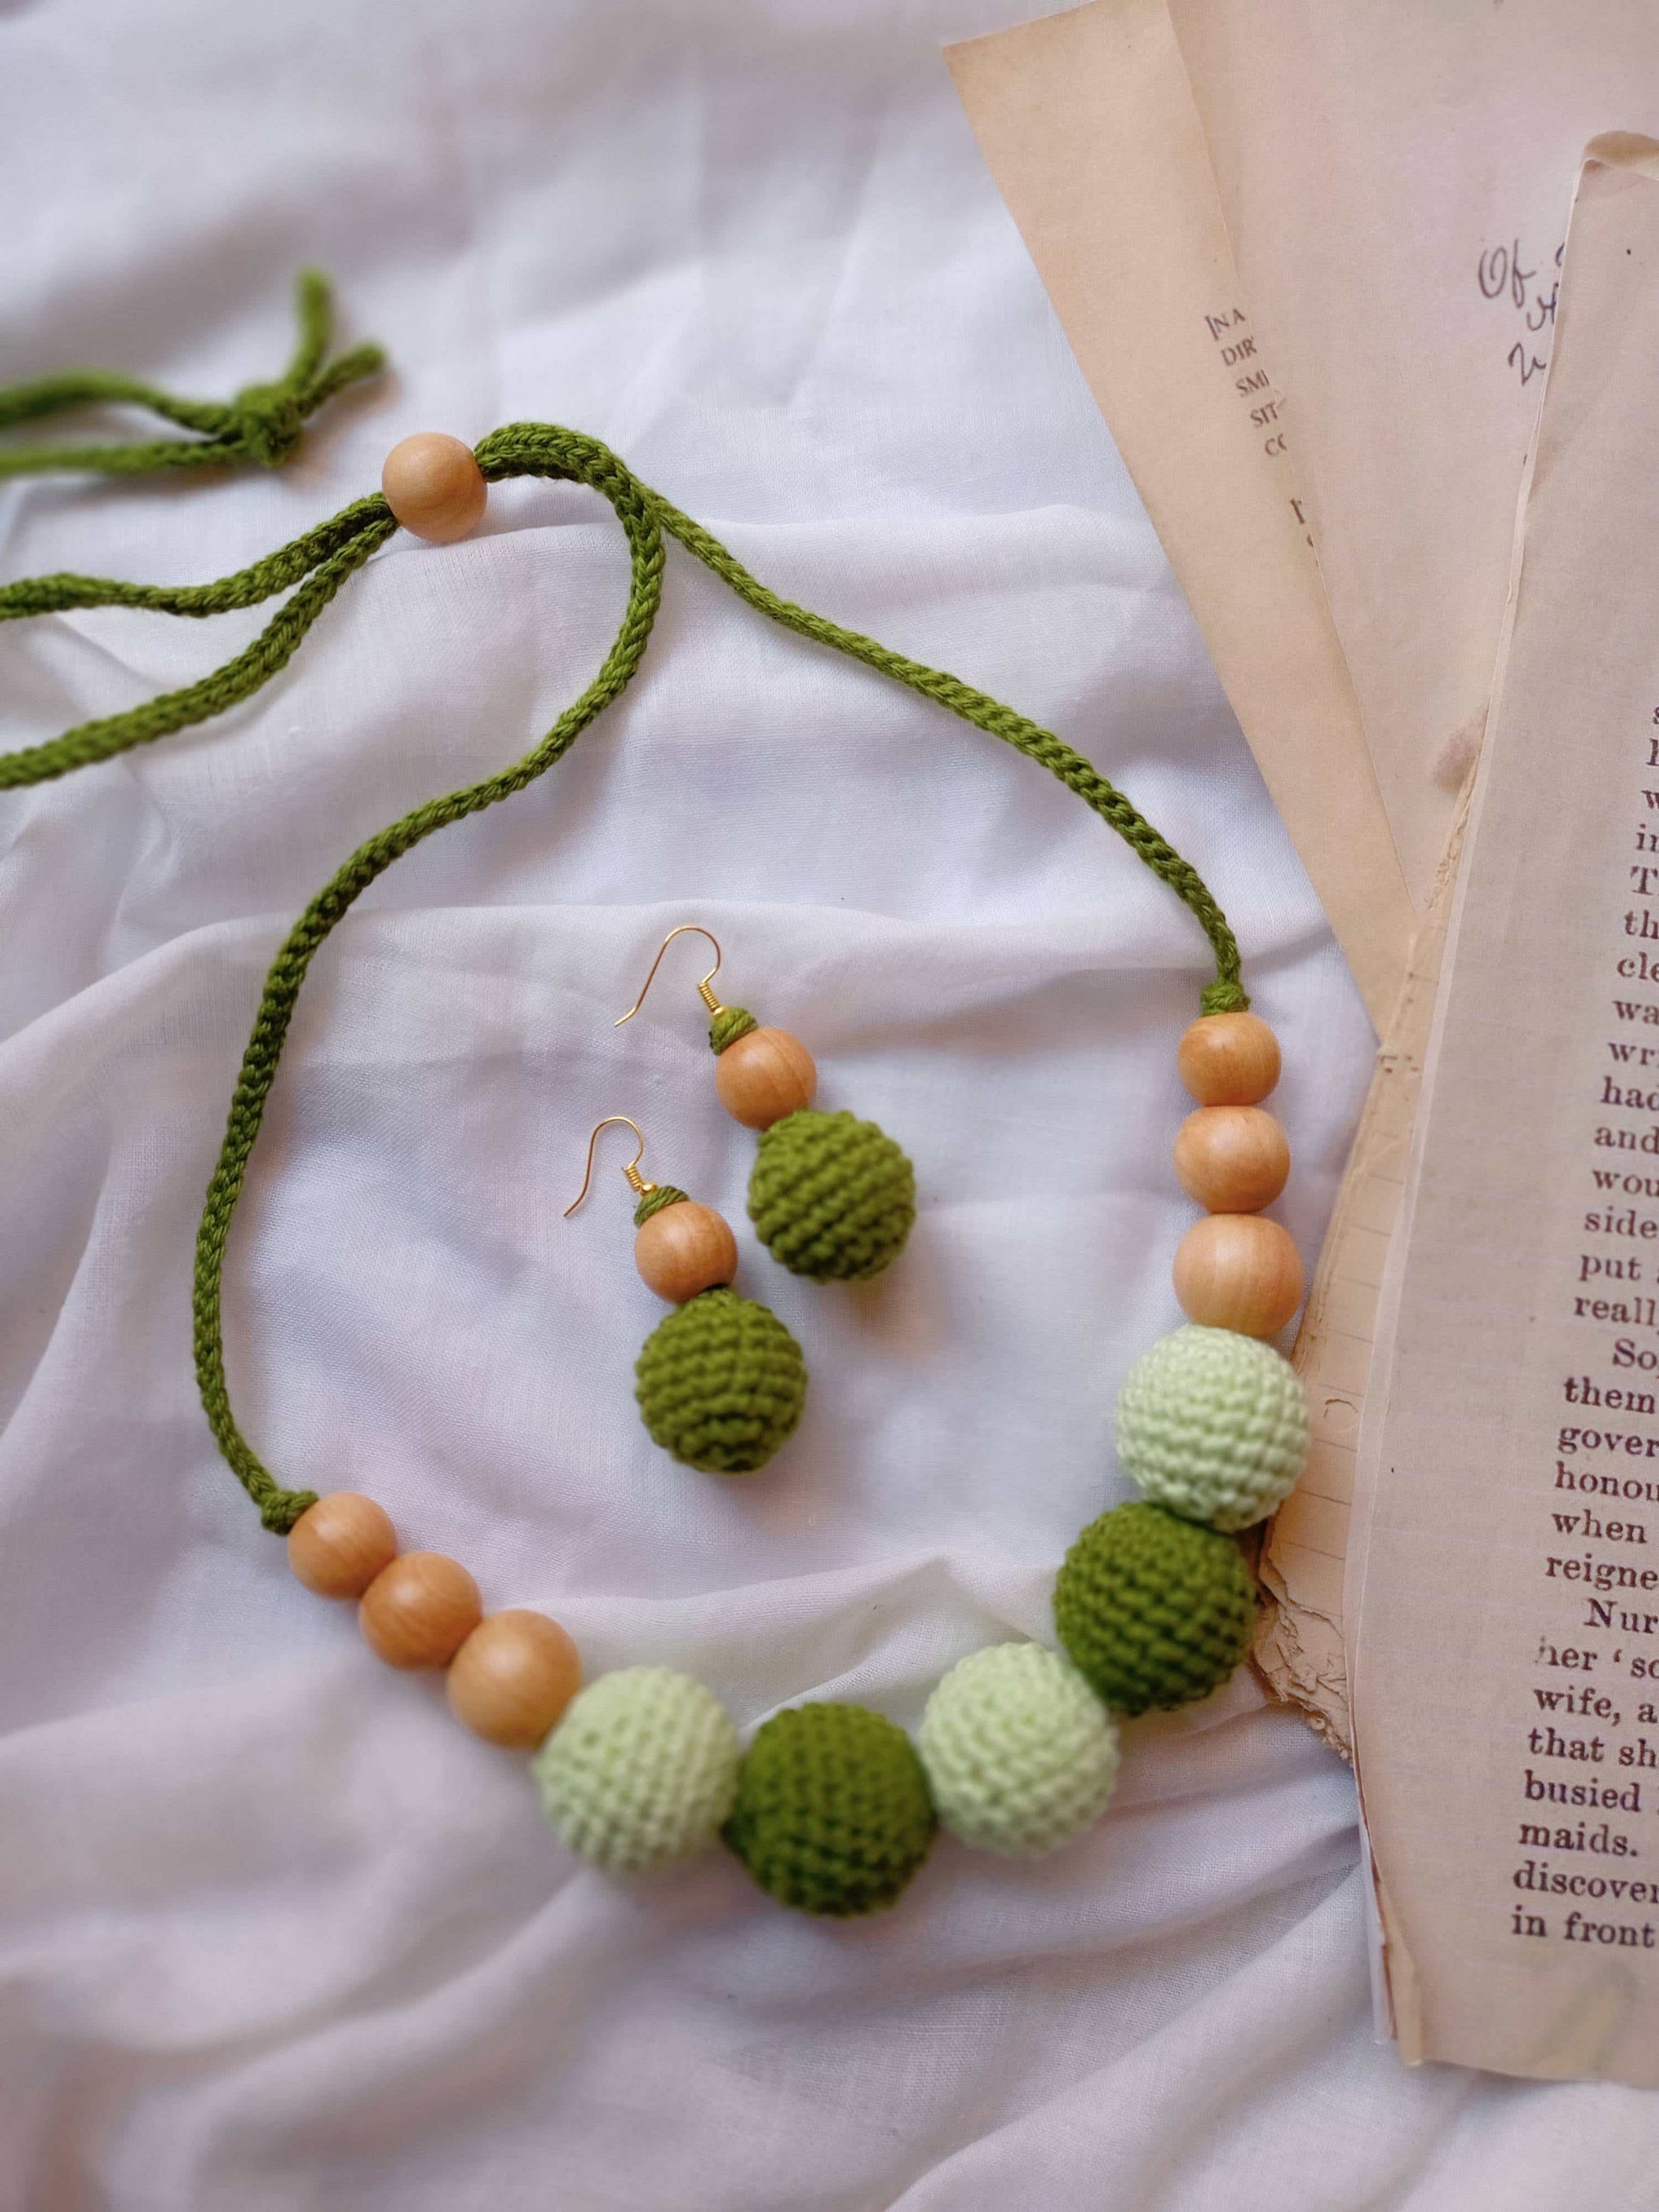 Dark and light green crochet round beads choker necklace on white backdrop